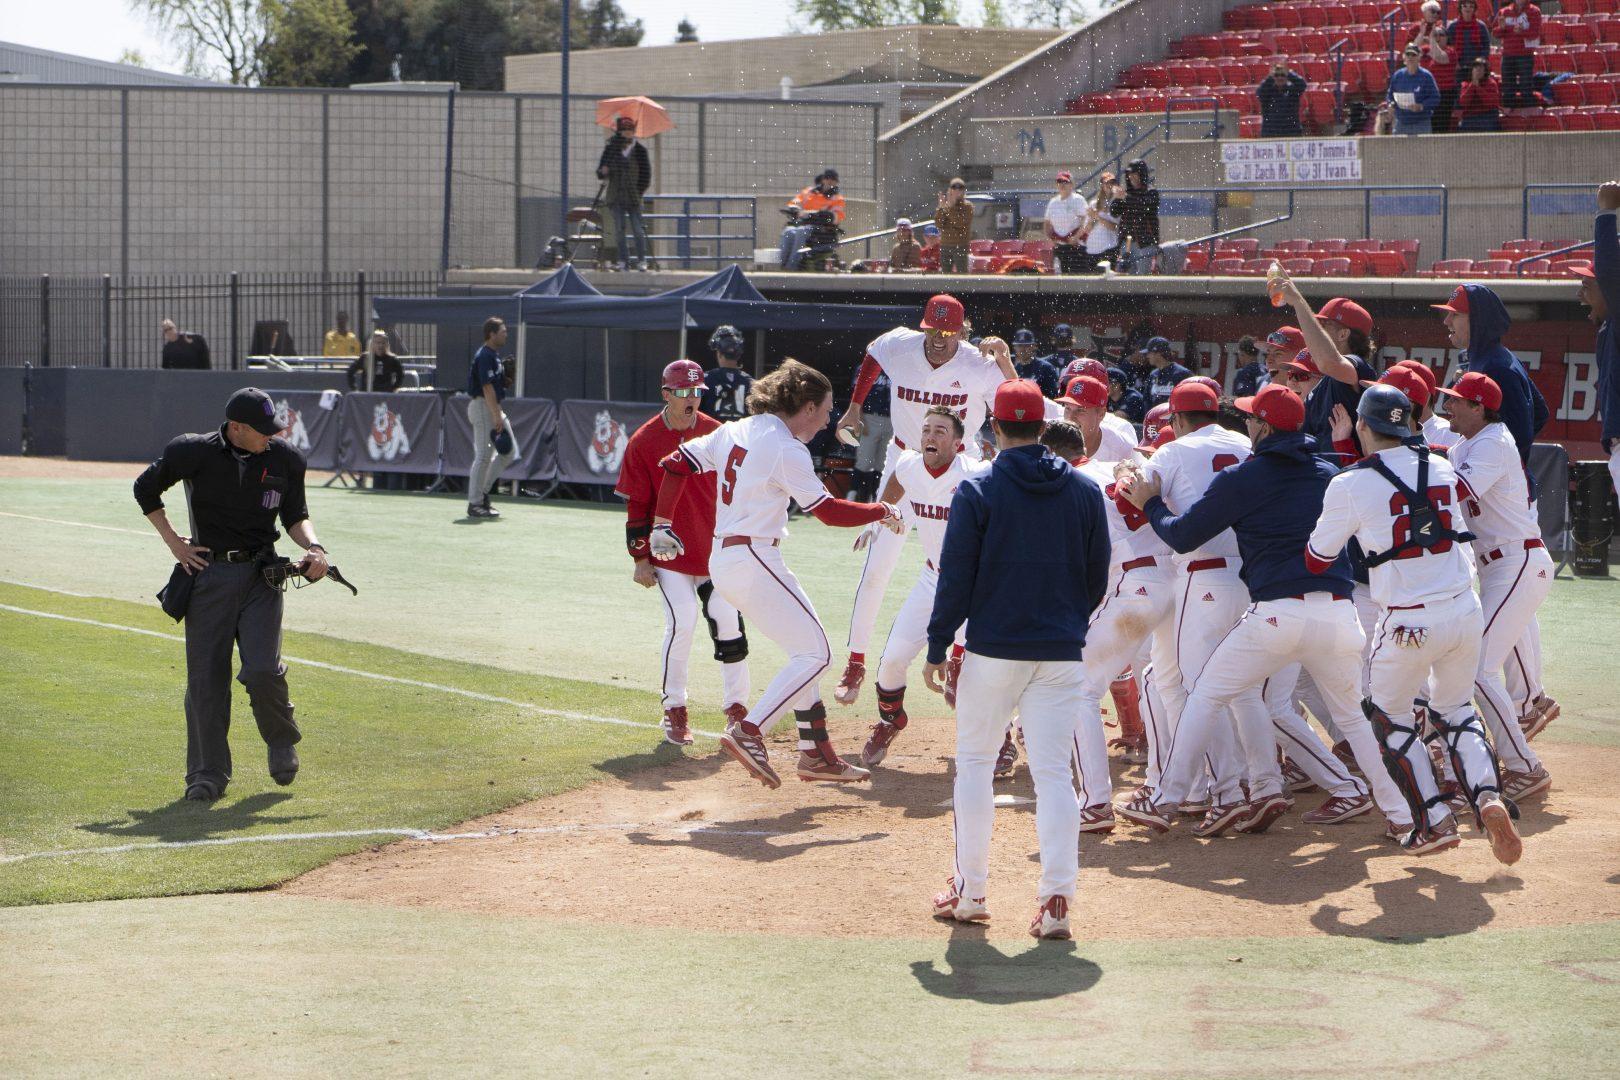 The Fresno State Baseball team celebrated as Senior Josh Lauck runs home after hitting the game winning home-run in the second game of the series against Nevada on March 20, 2022. (Wyatt Bible/ The Collegian)